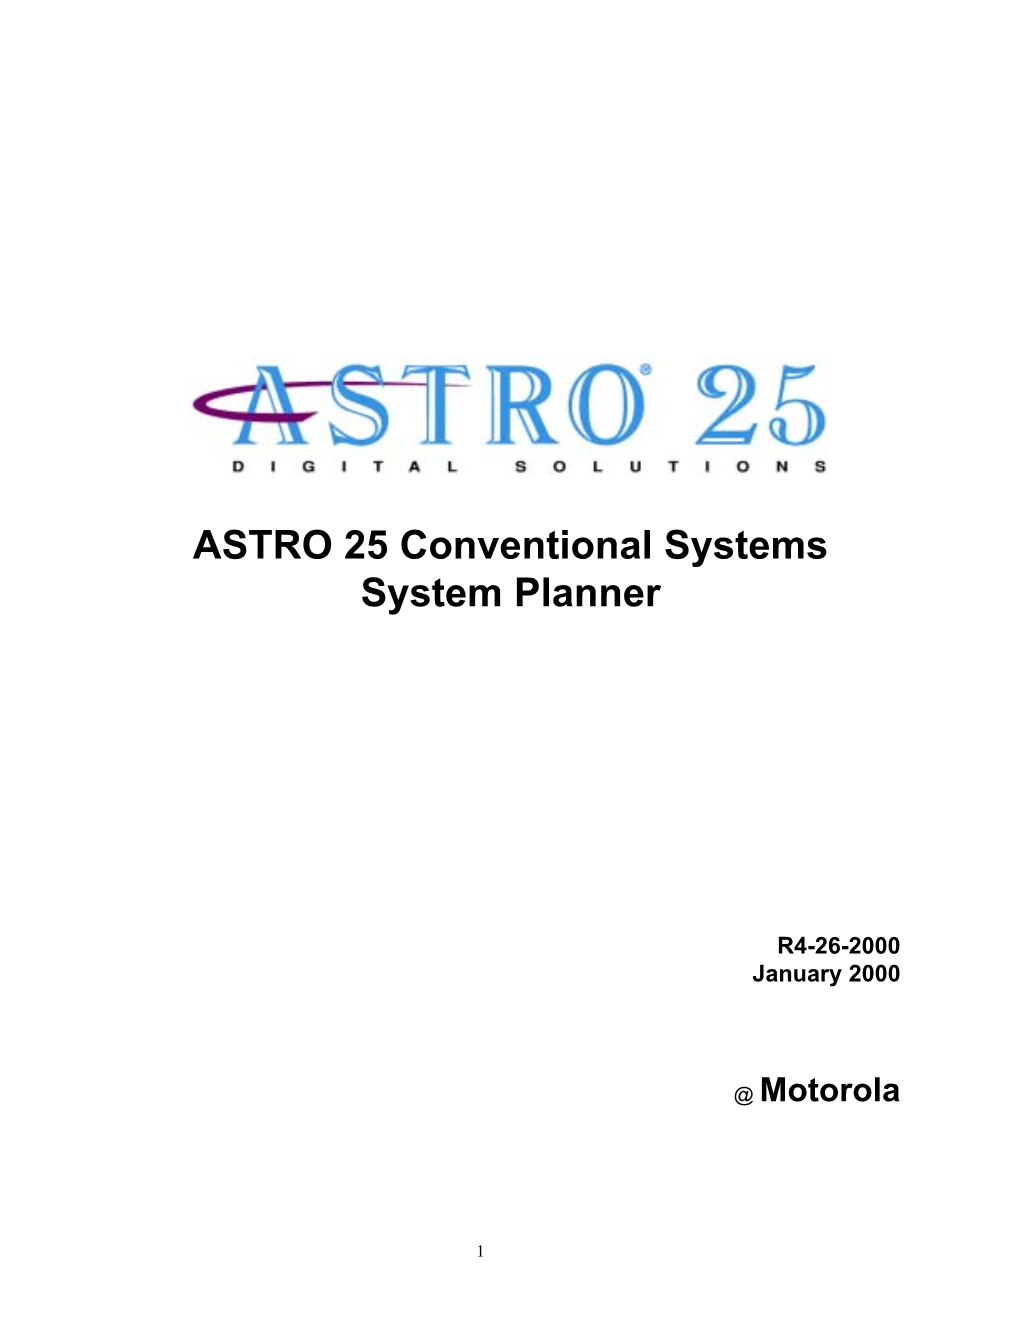 ASTRO 25 Conventional Systems System Planner